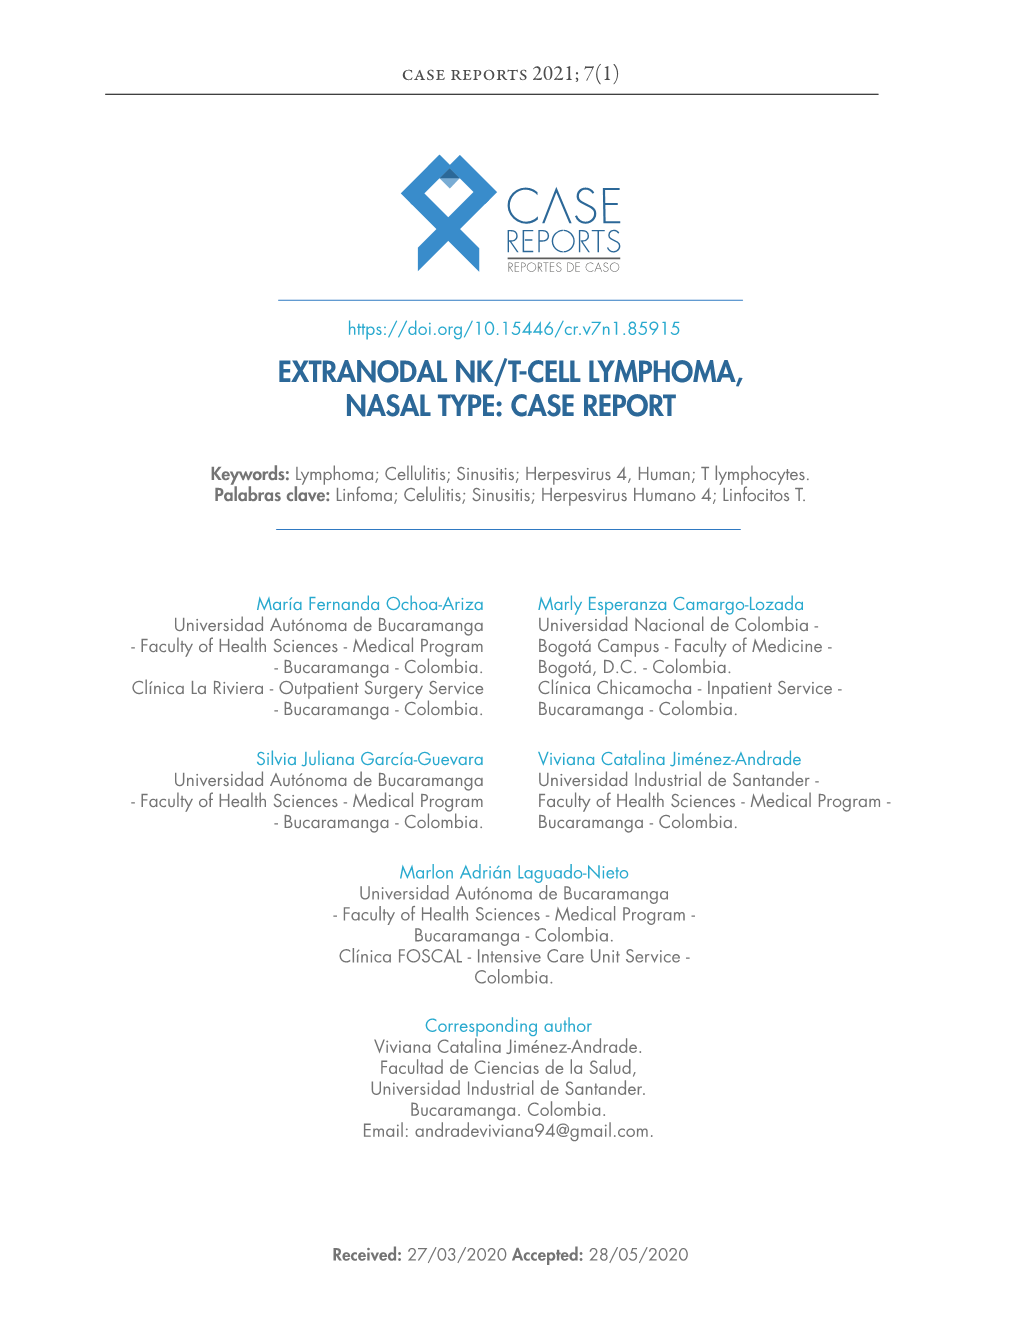 Extranodal Nk/T-Cell Lymphoma, Nasal Type: Case Report